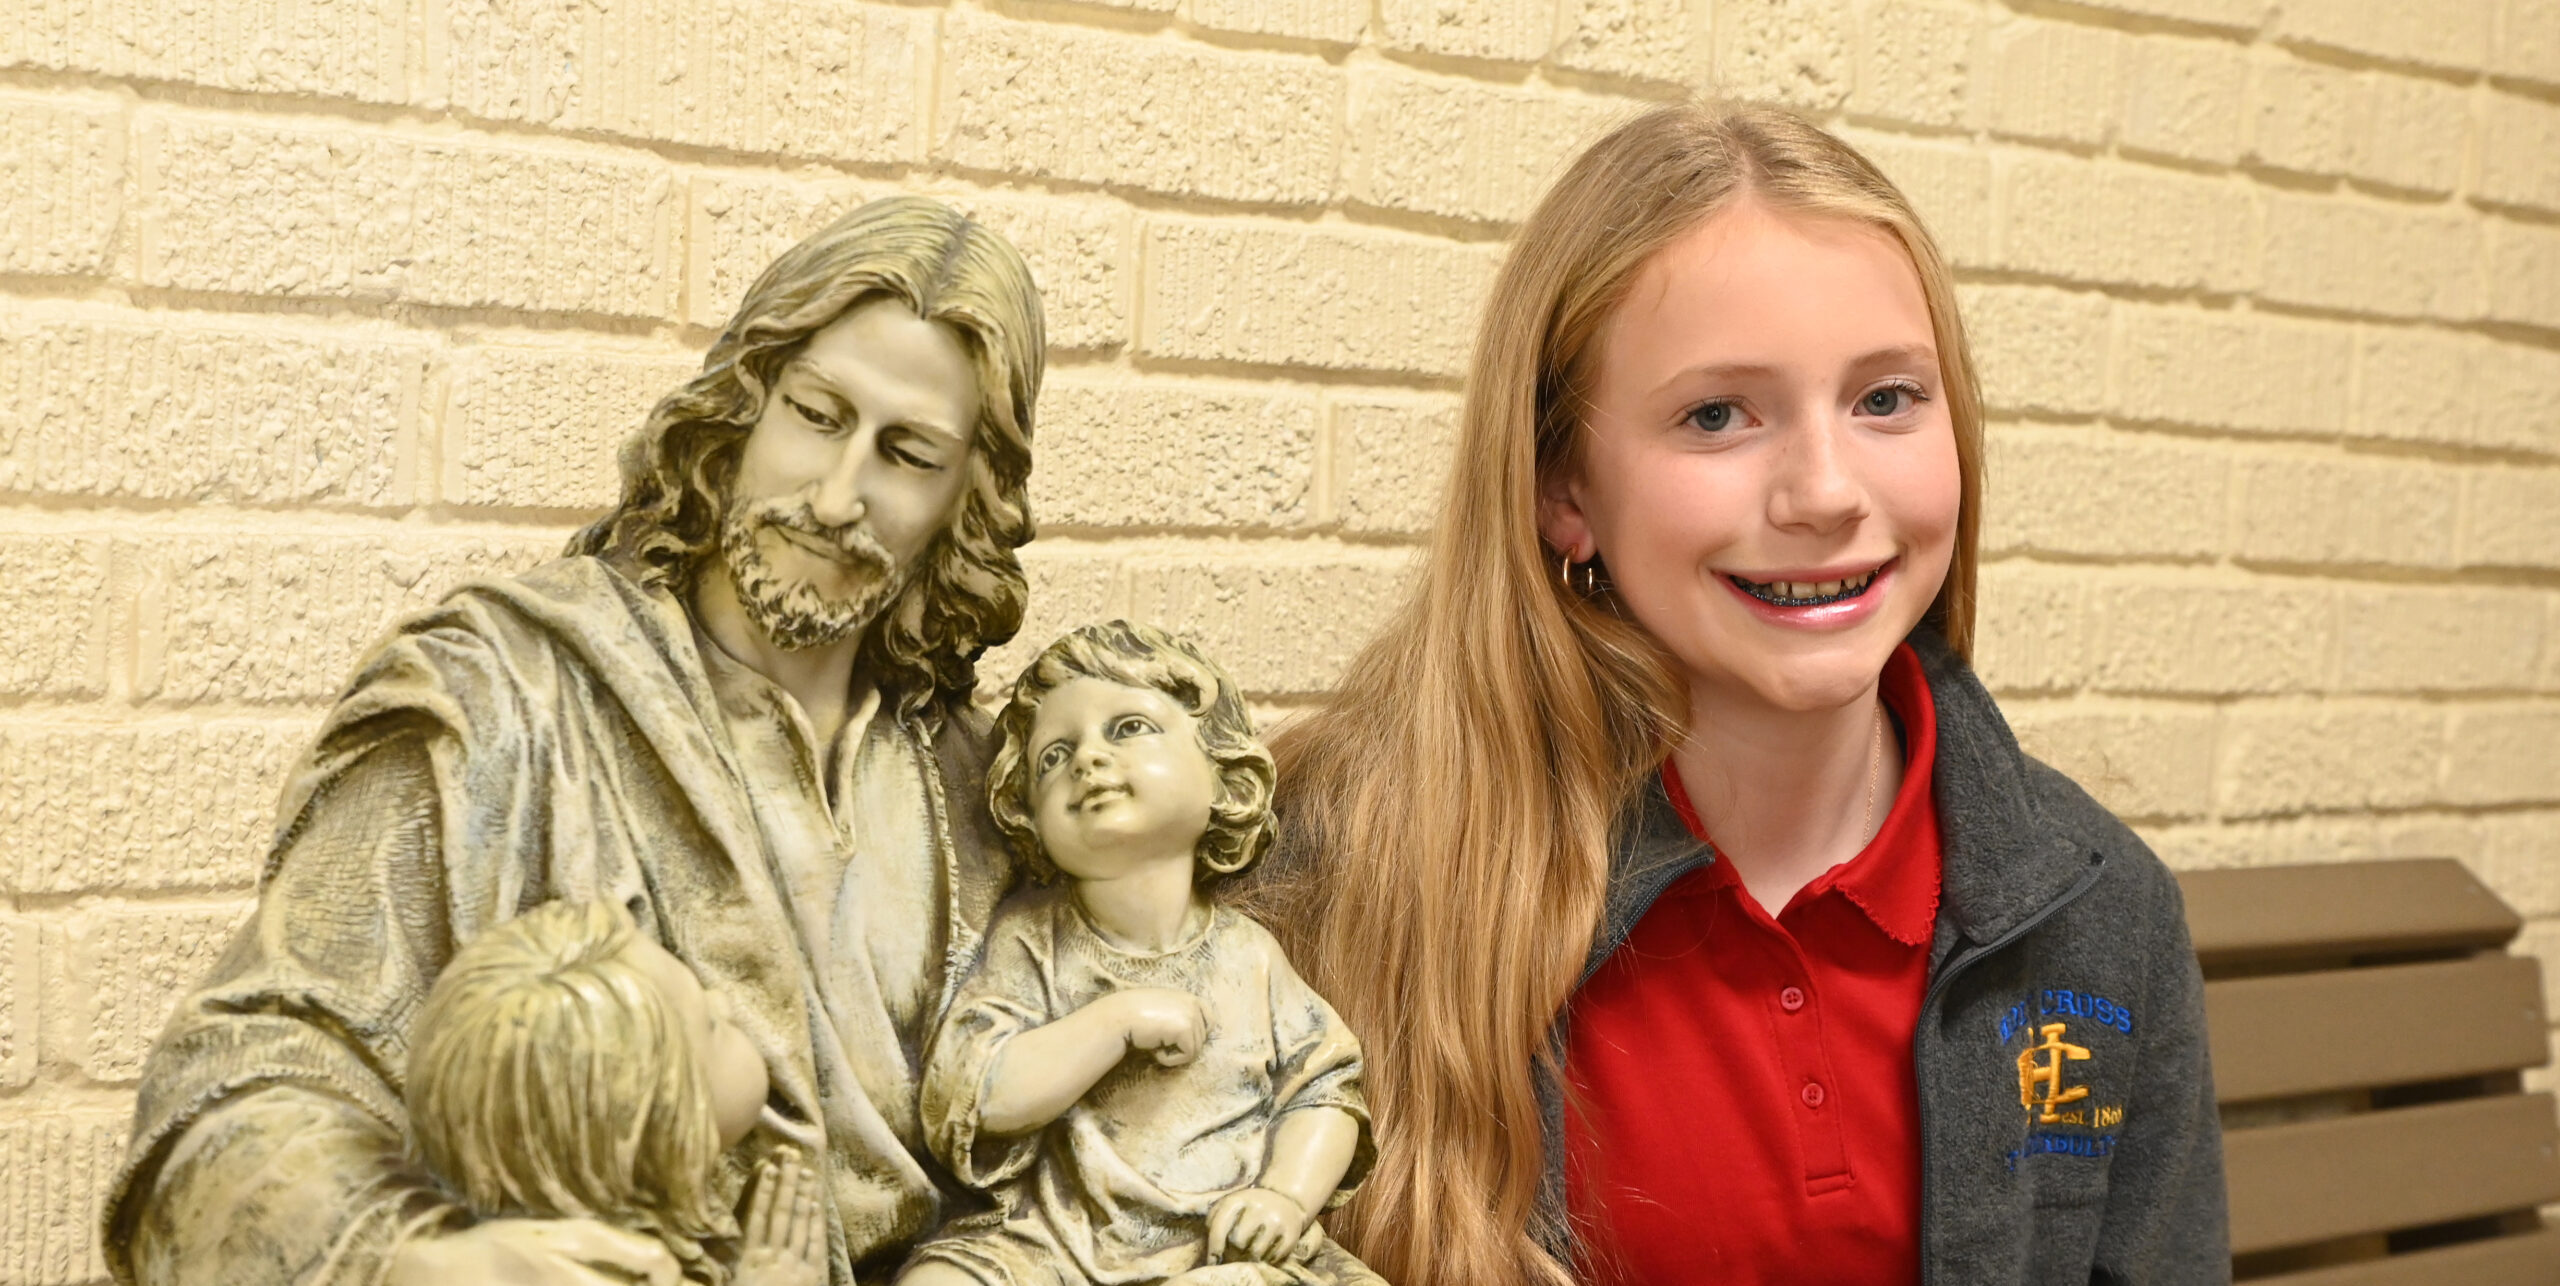 Student sits next to statue of Jesus at Holy Cross School which is located near Wequiock Falls.